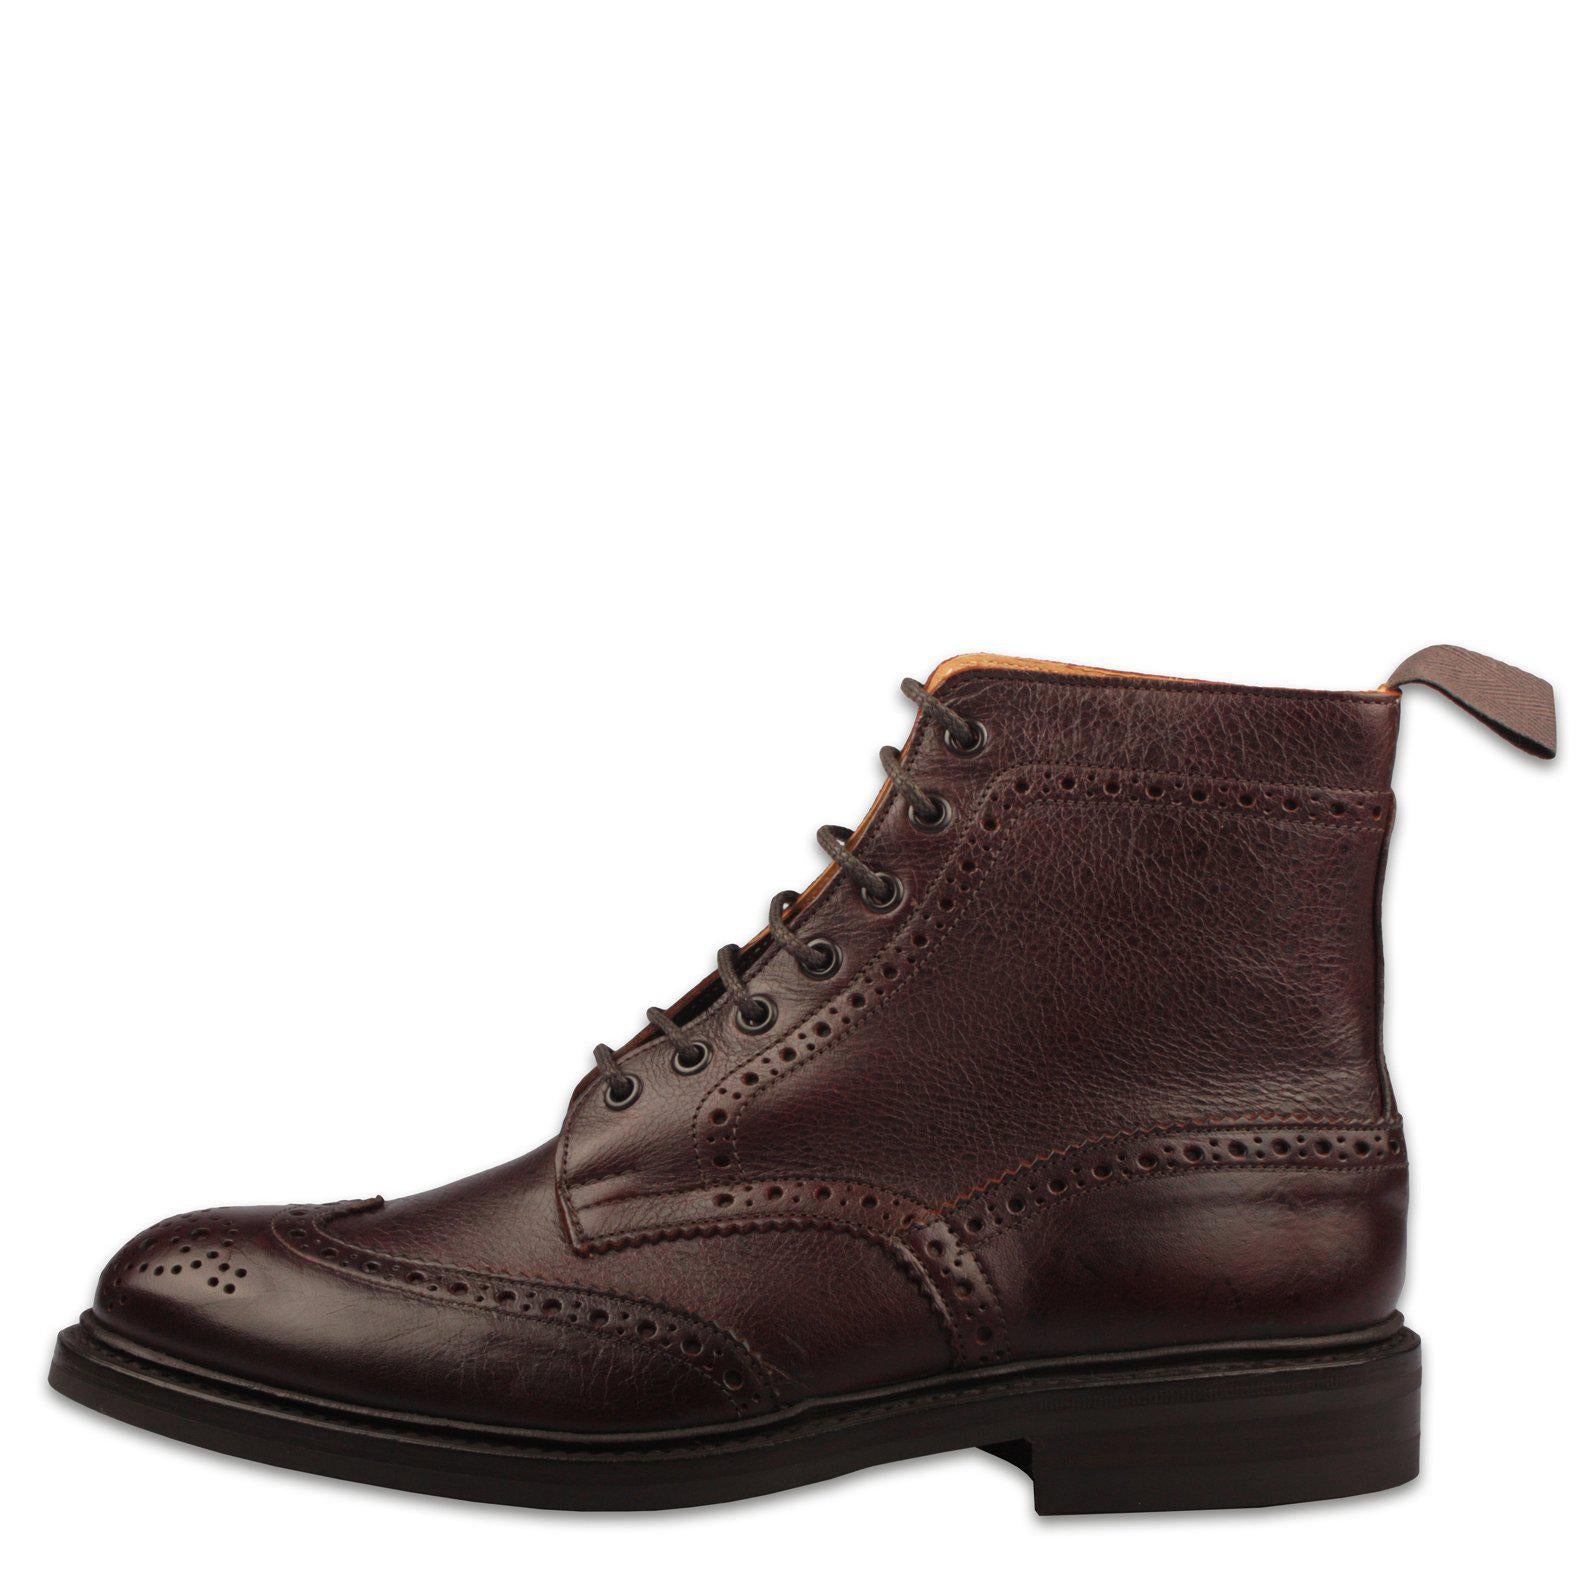 Stow Brogue Boots-Tricker's-Conrad Hasselbach Shoes & Garment